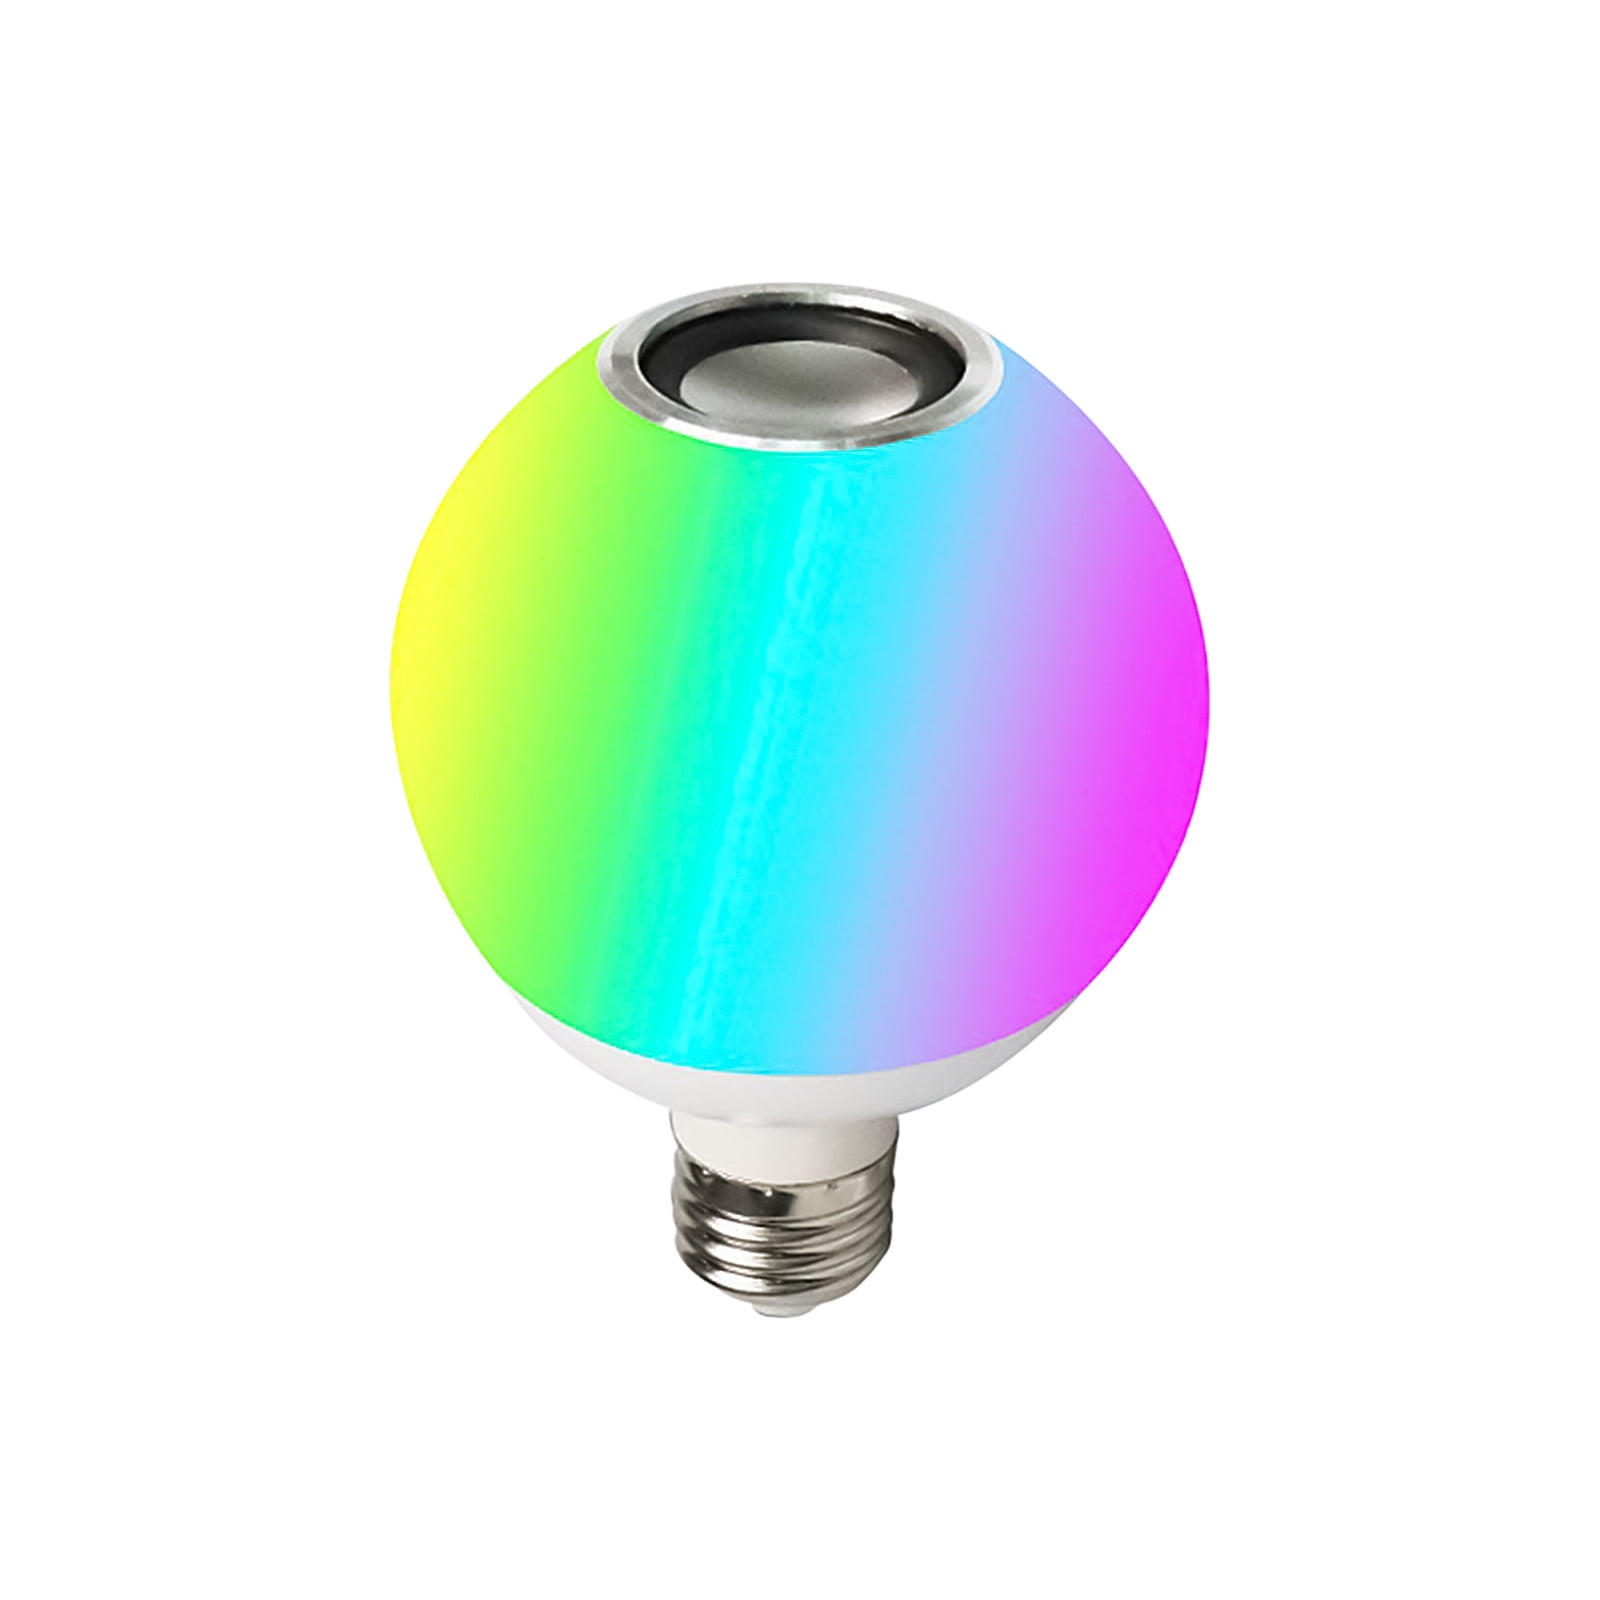 taxi Lengtegraad Voorschrift Jmntiy Smart Home Lights,LED Light Bulb With Integrated Bluetooth Speaker,  E27 RGB Changing Lamp Wireless Stereo Audio,24 Keys Remote Control RGB  Color Changing Speake - Walmart.com